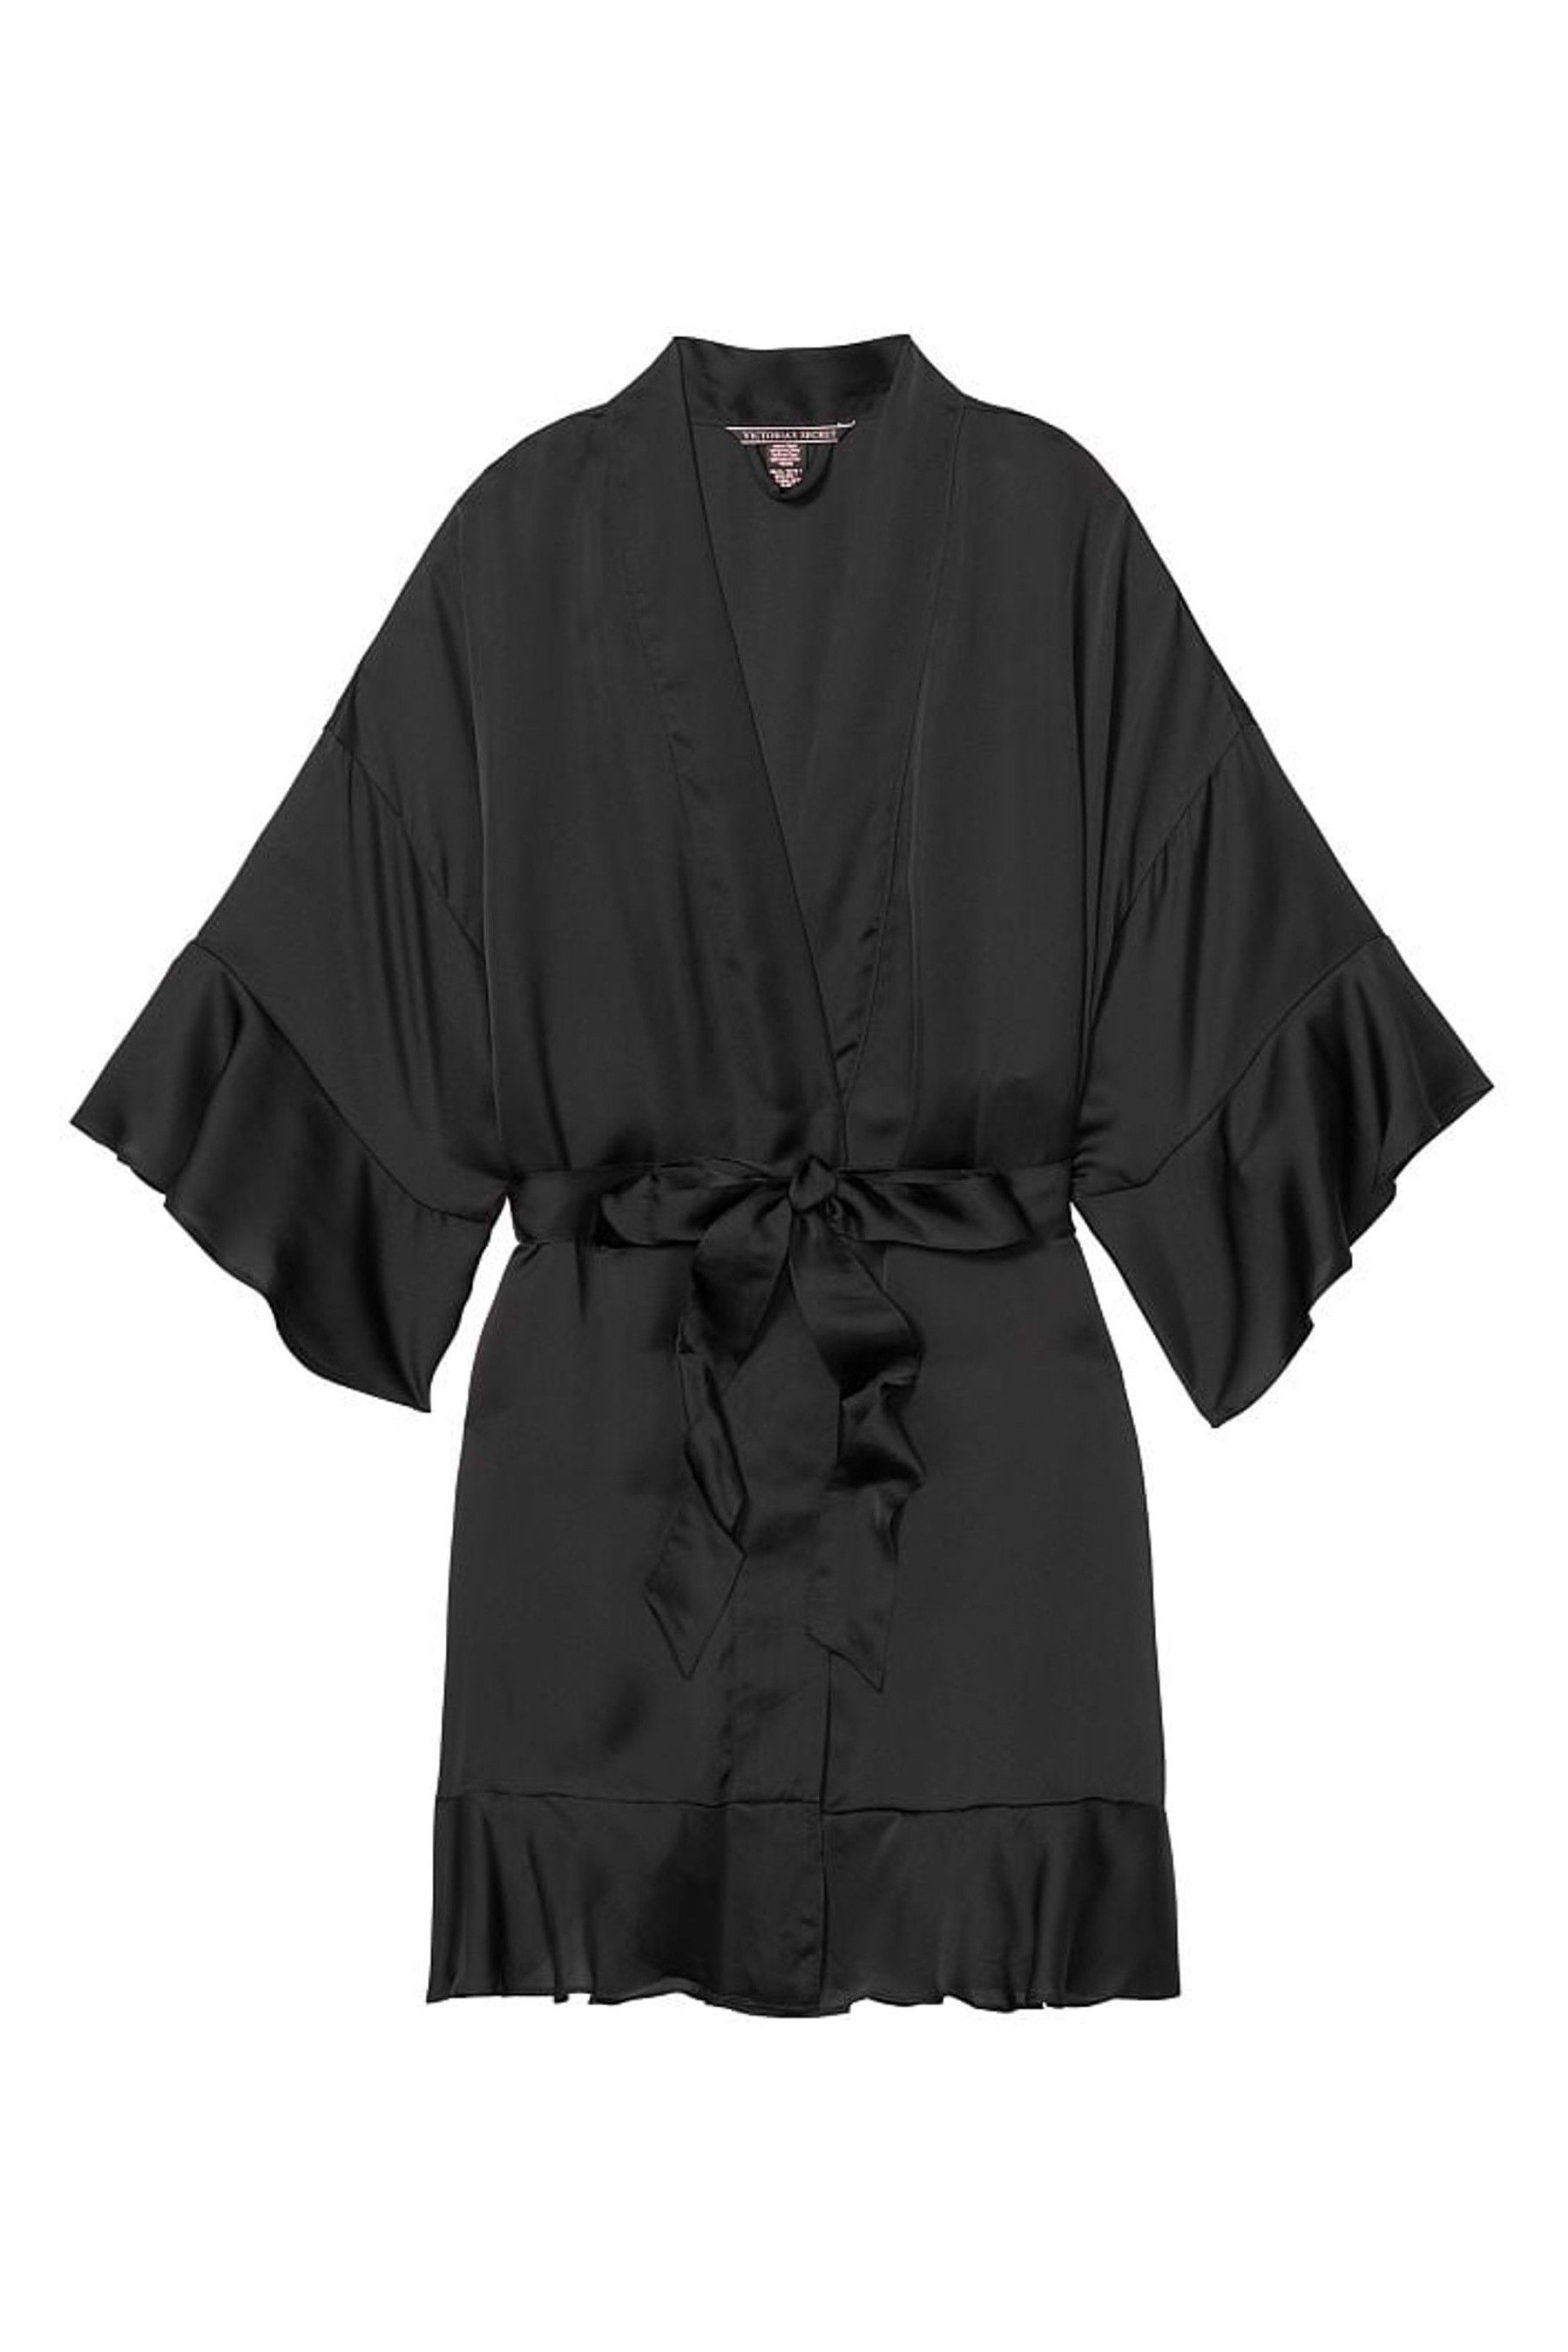 Buy Victoria's Secret Classic Flounce Dressing Gown from the Victoria's ...